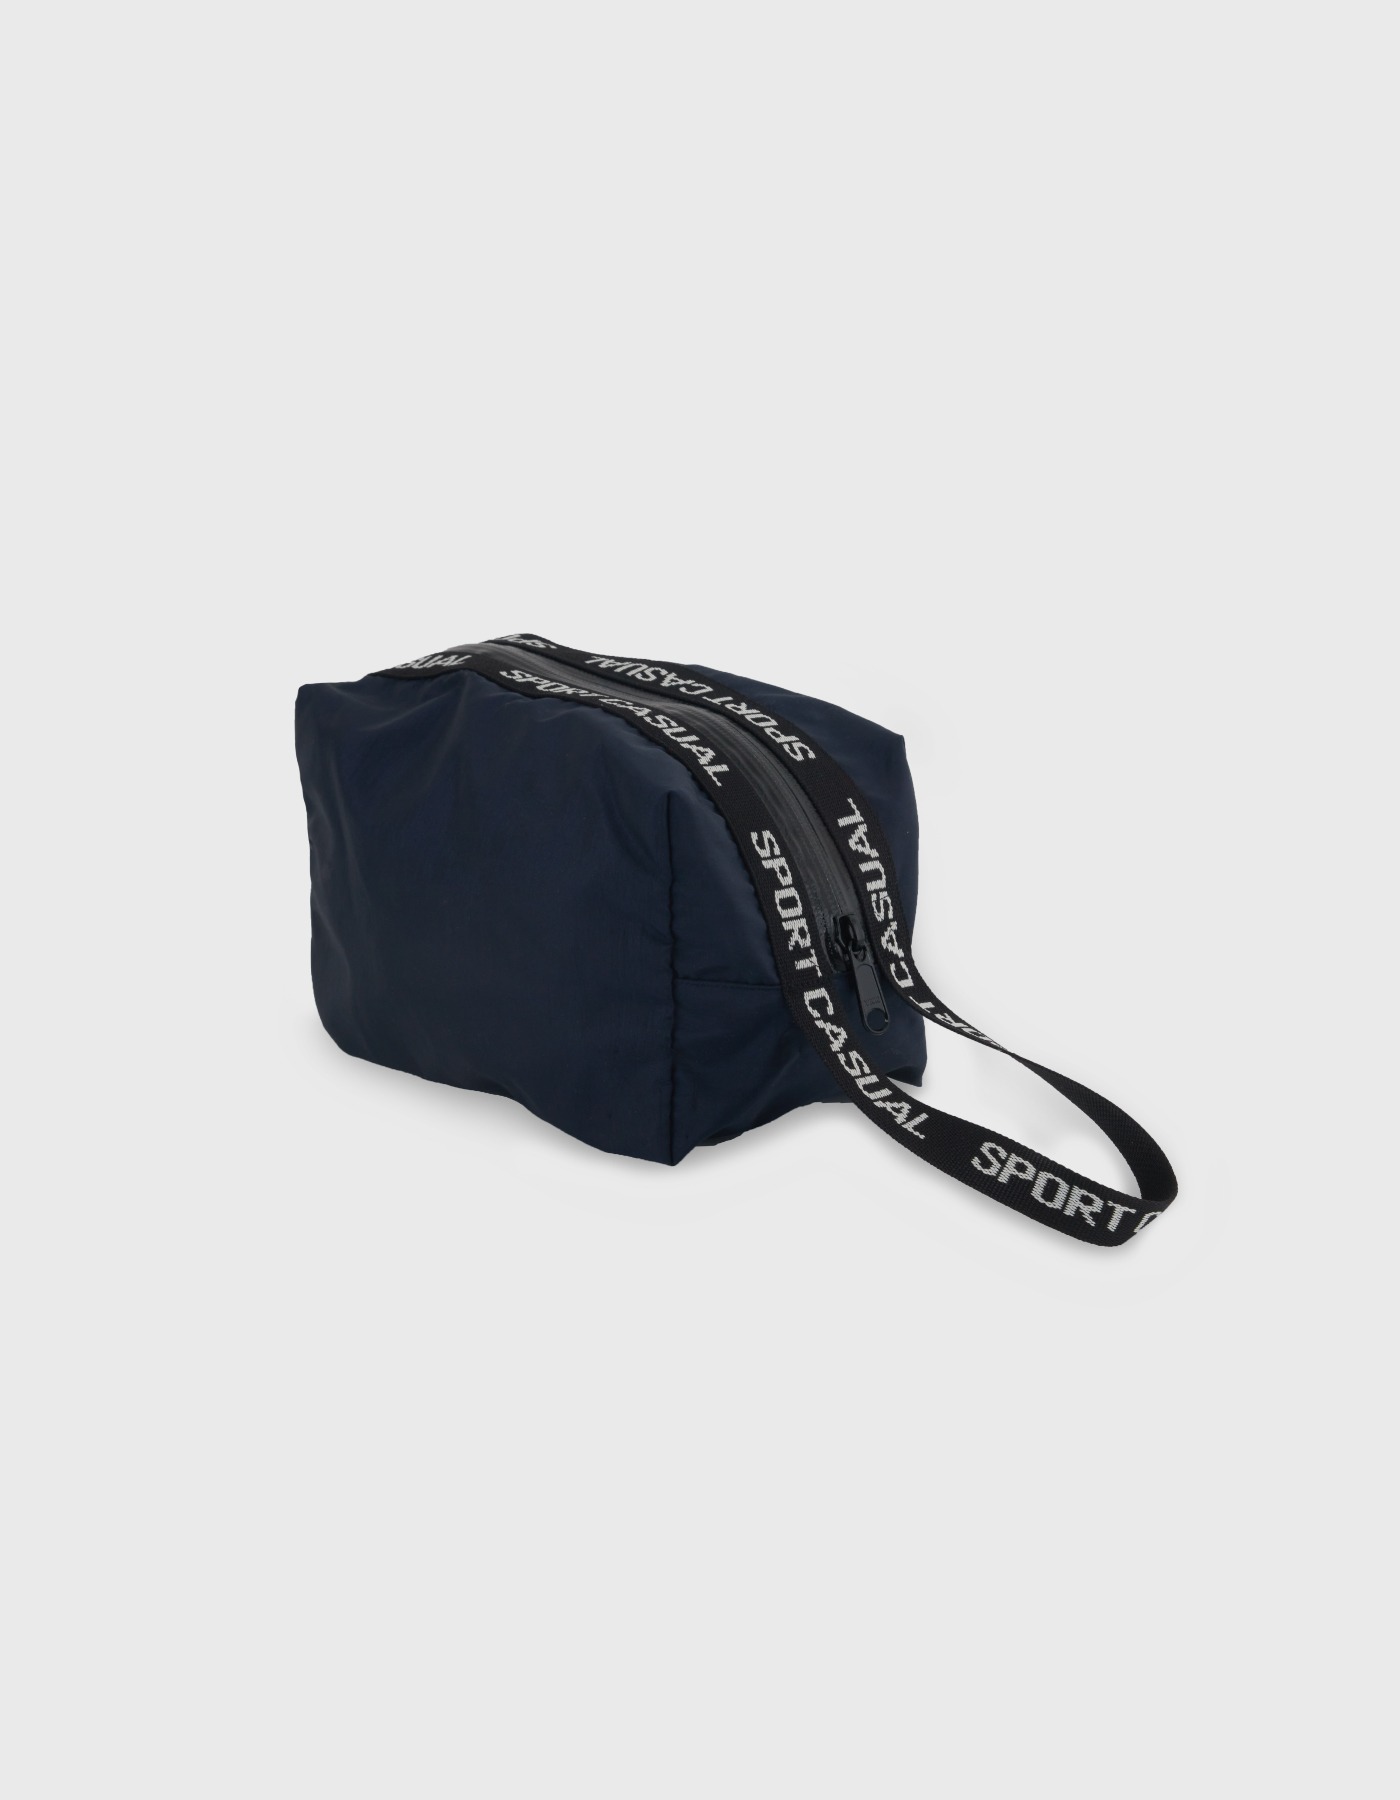 SPORTS POUCH / Navy